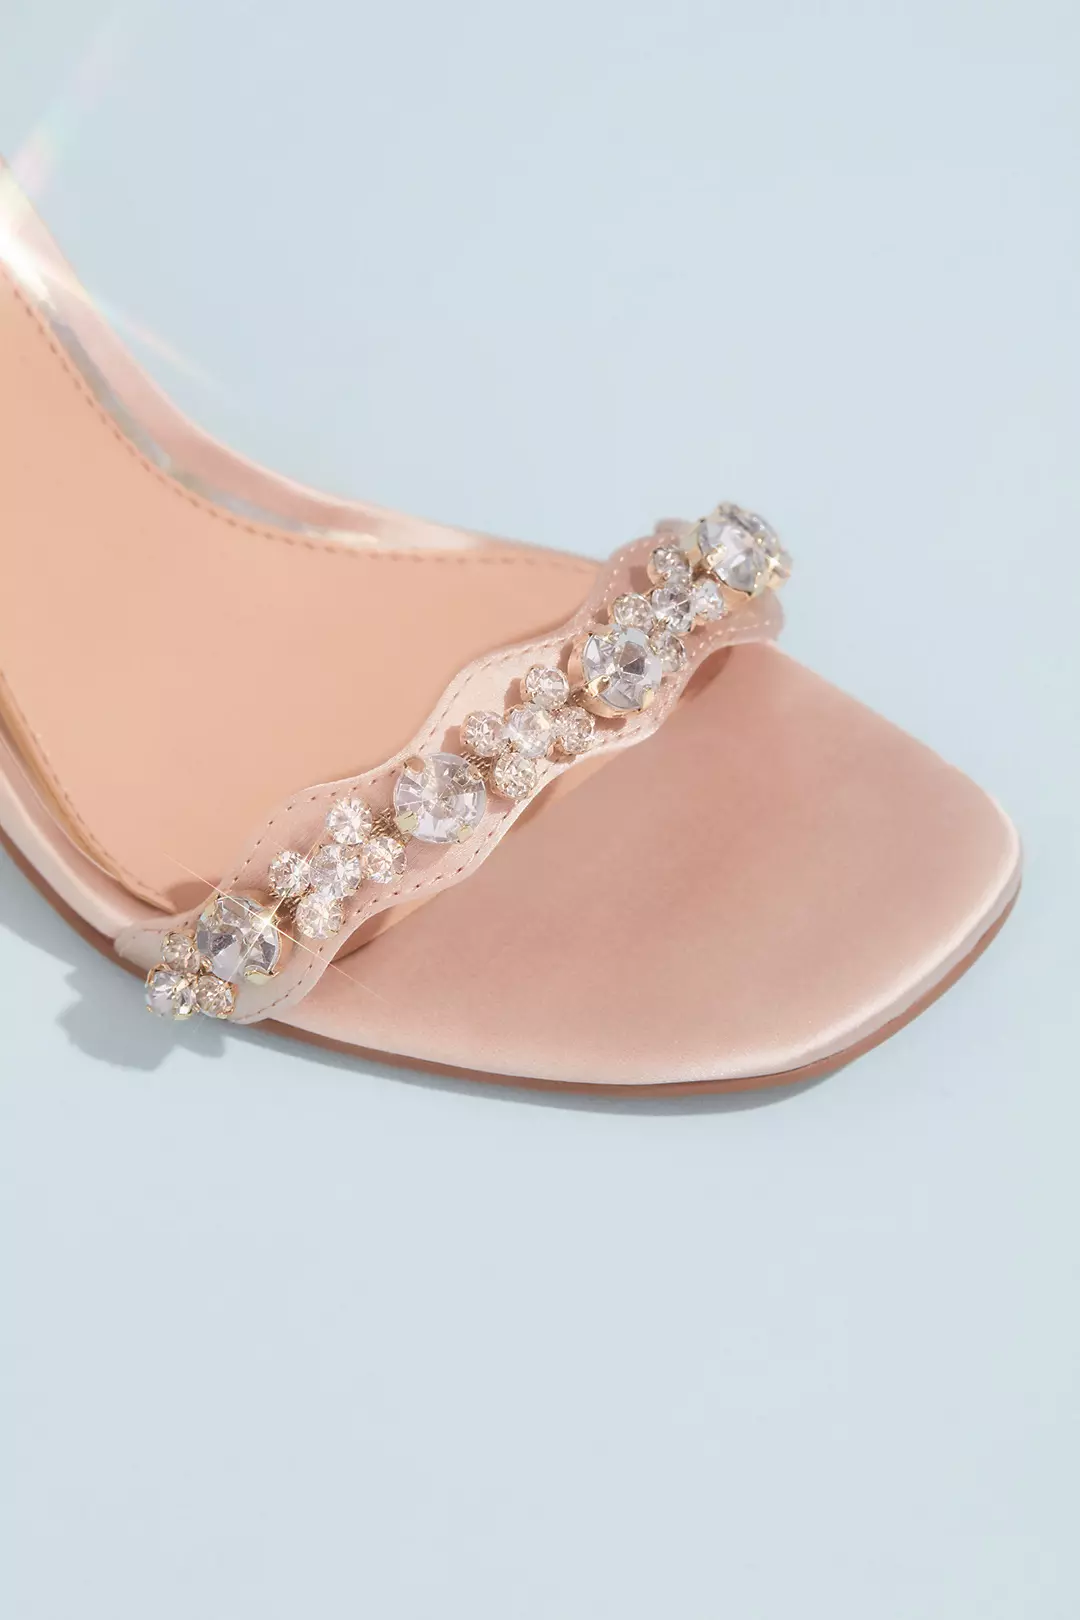 Satin Stiletto Sandals with Crystal Ankle Straps Image 3